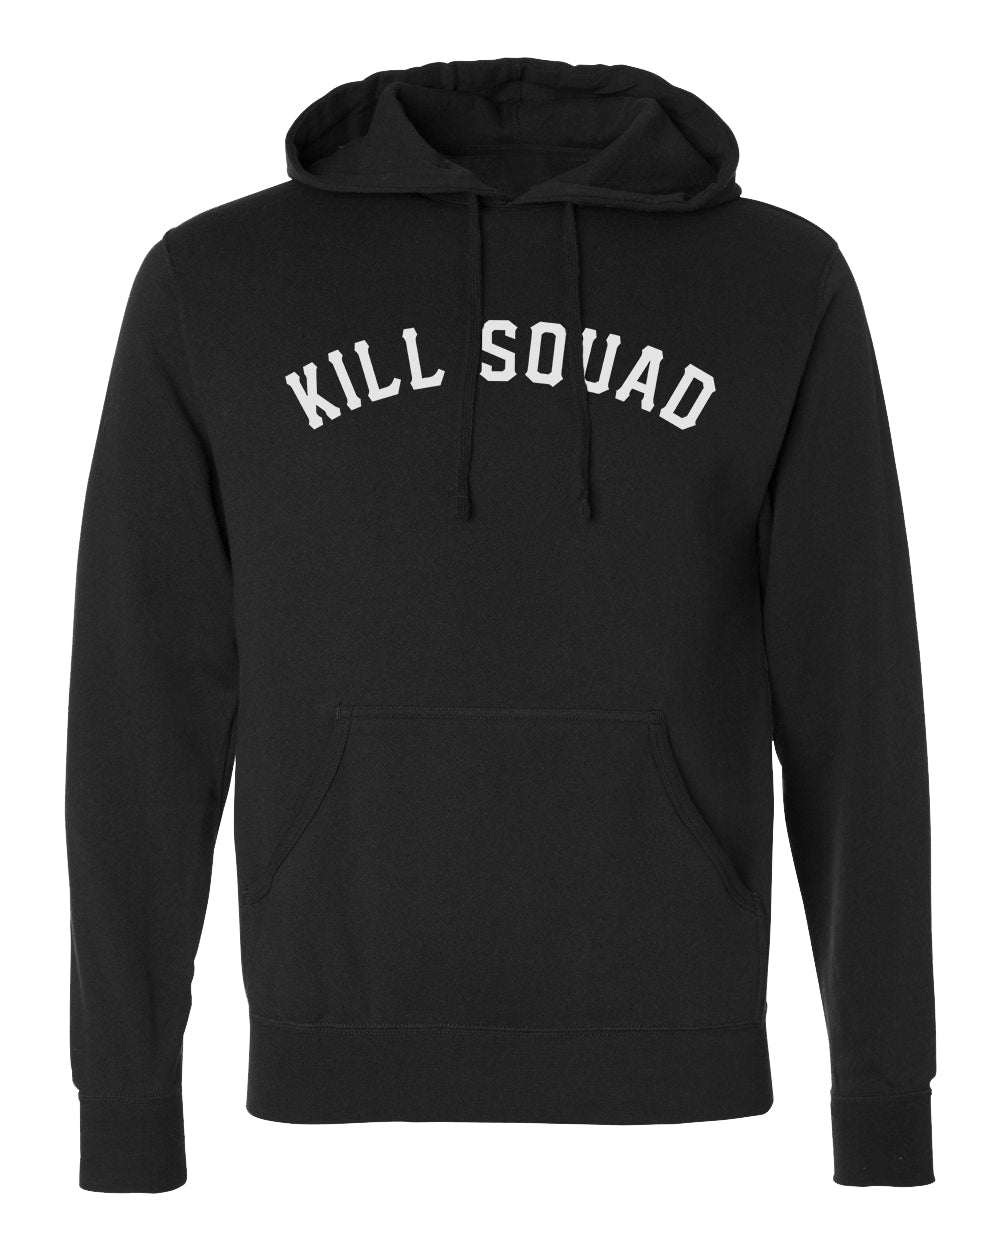 Kill Squad - on Black Pullover Hoodie - Conquering Barbell